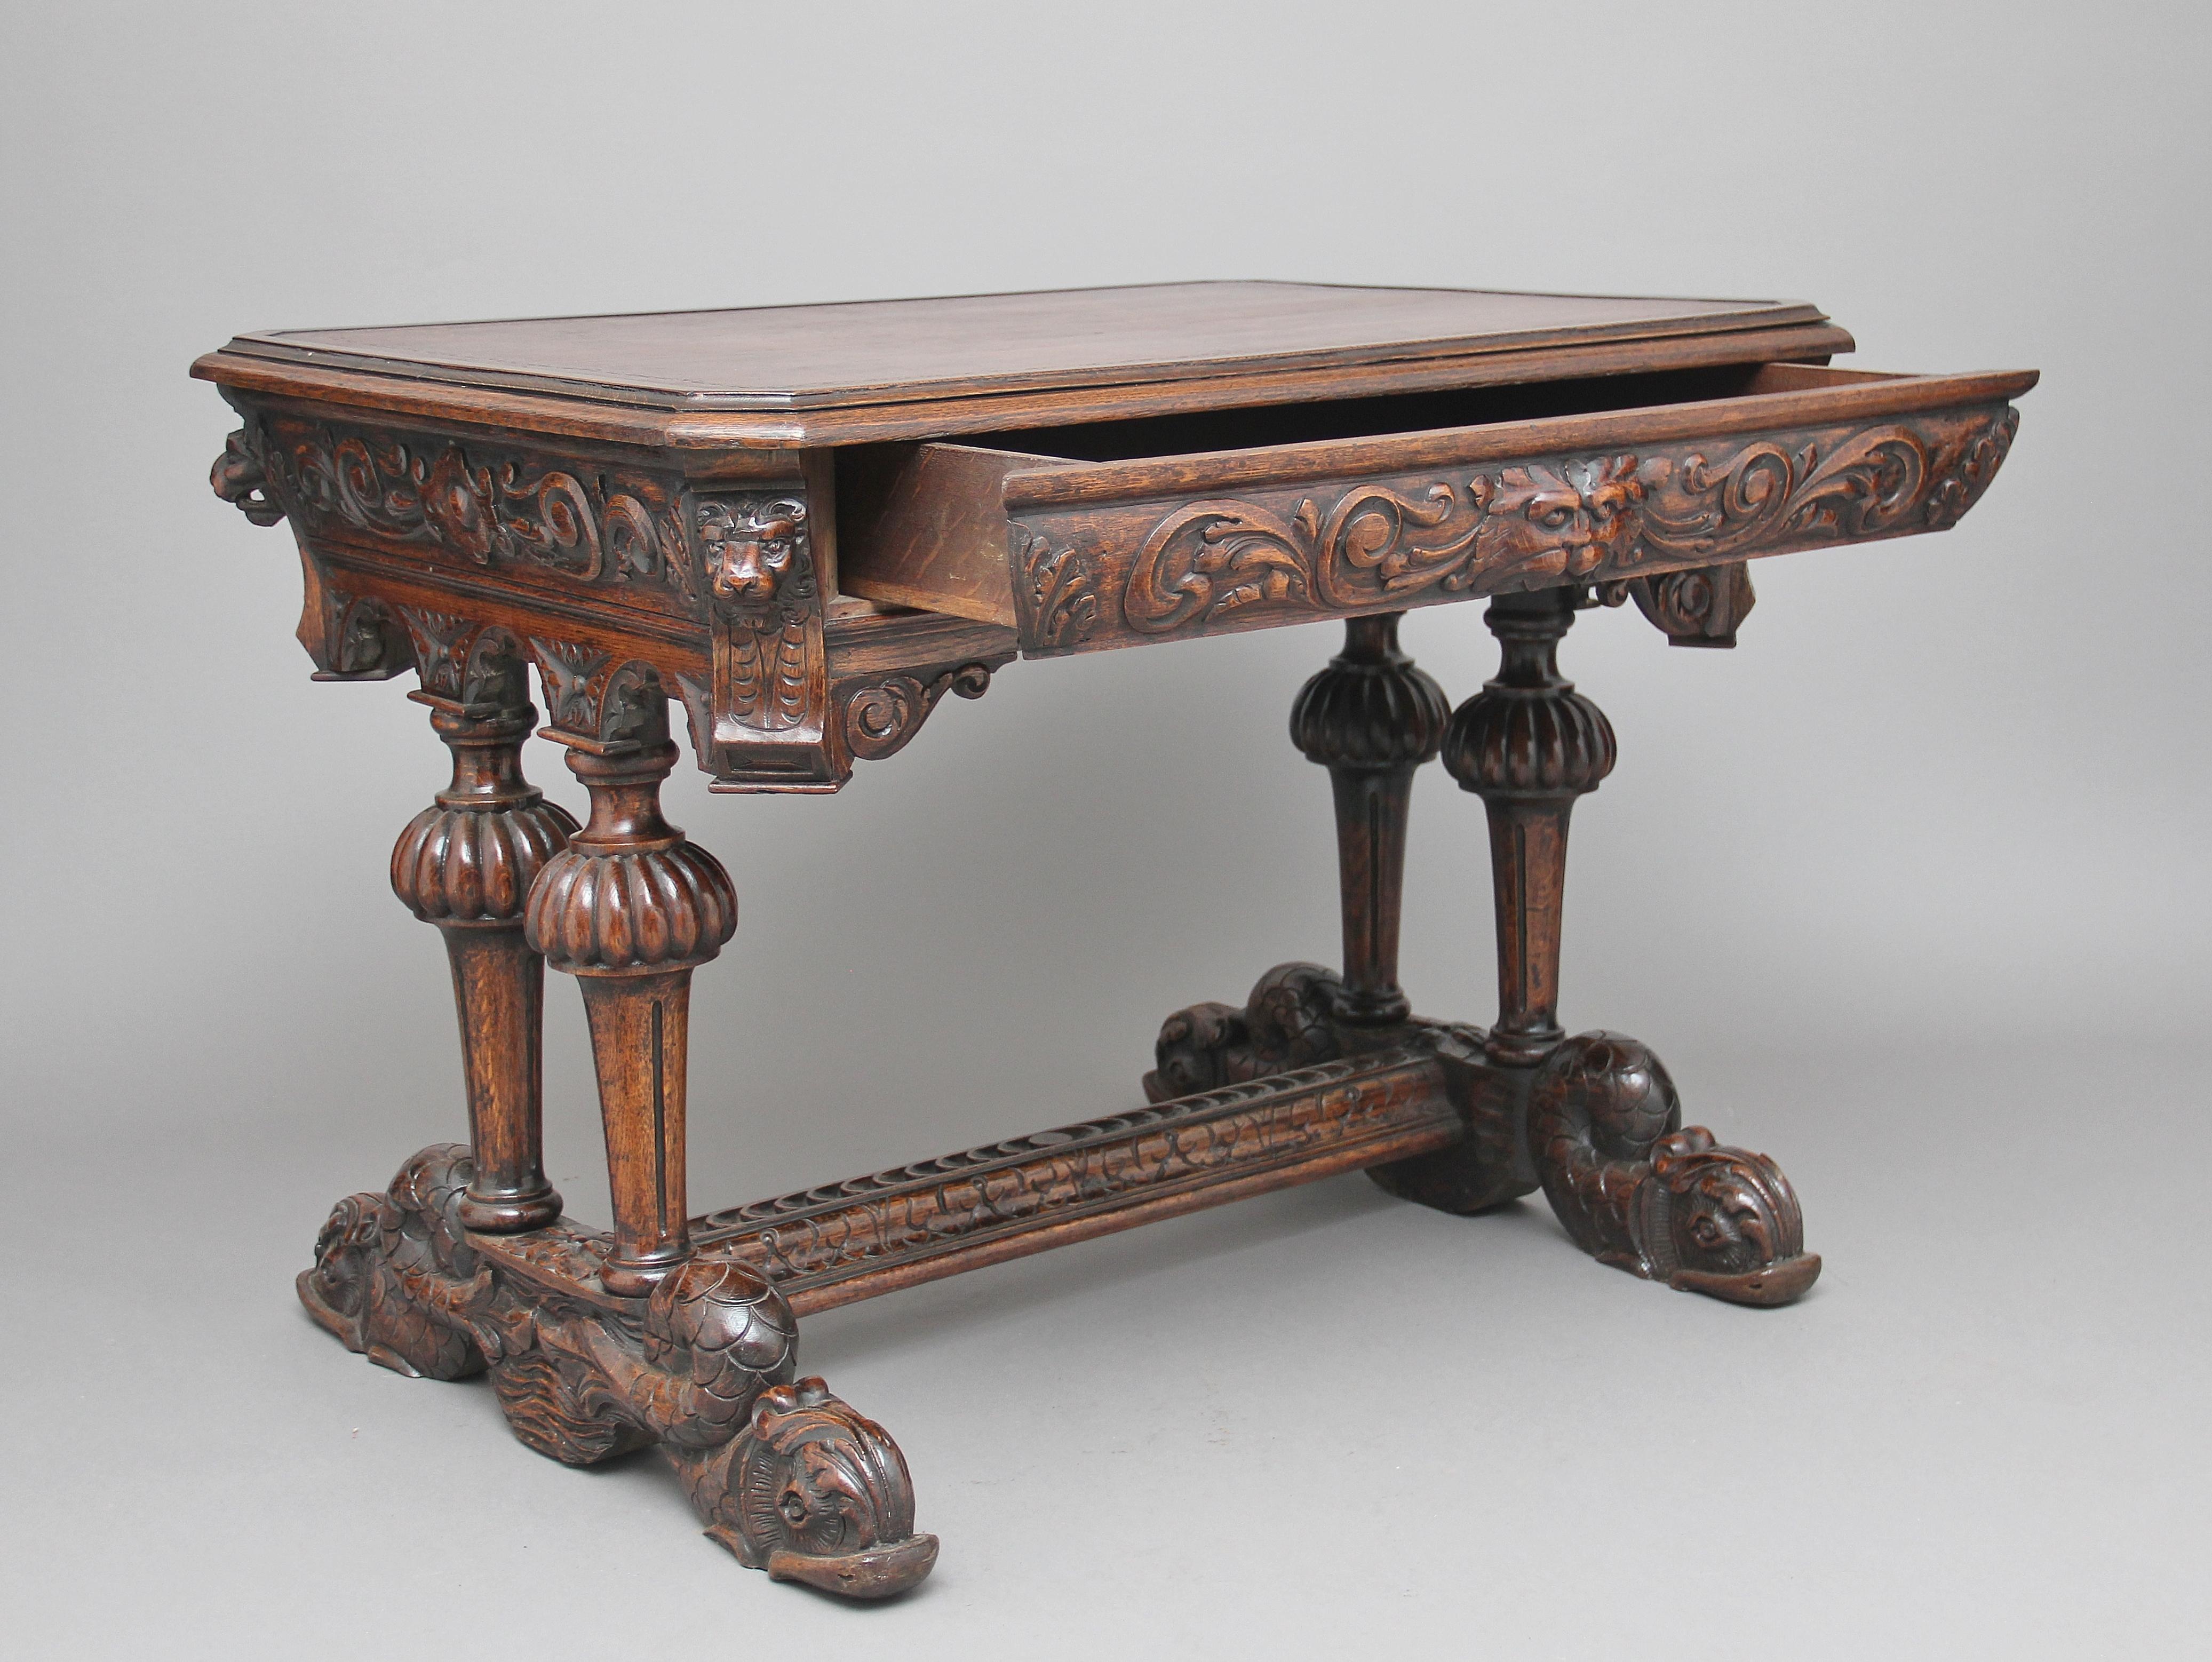 19th century carved oak writing table with one drawer in a heavily carved frieze, with lions heads on the corners and a grotesque mask as a handle, supported on twin columns and carved dolphins united by a stretcher, the moulded and crossbanded top